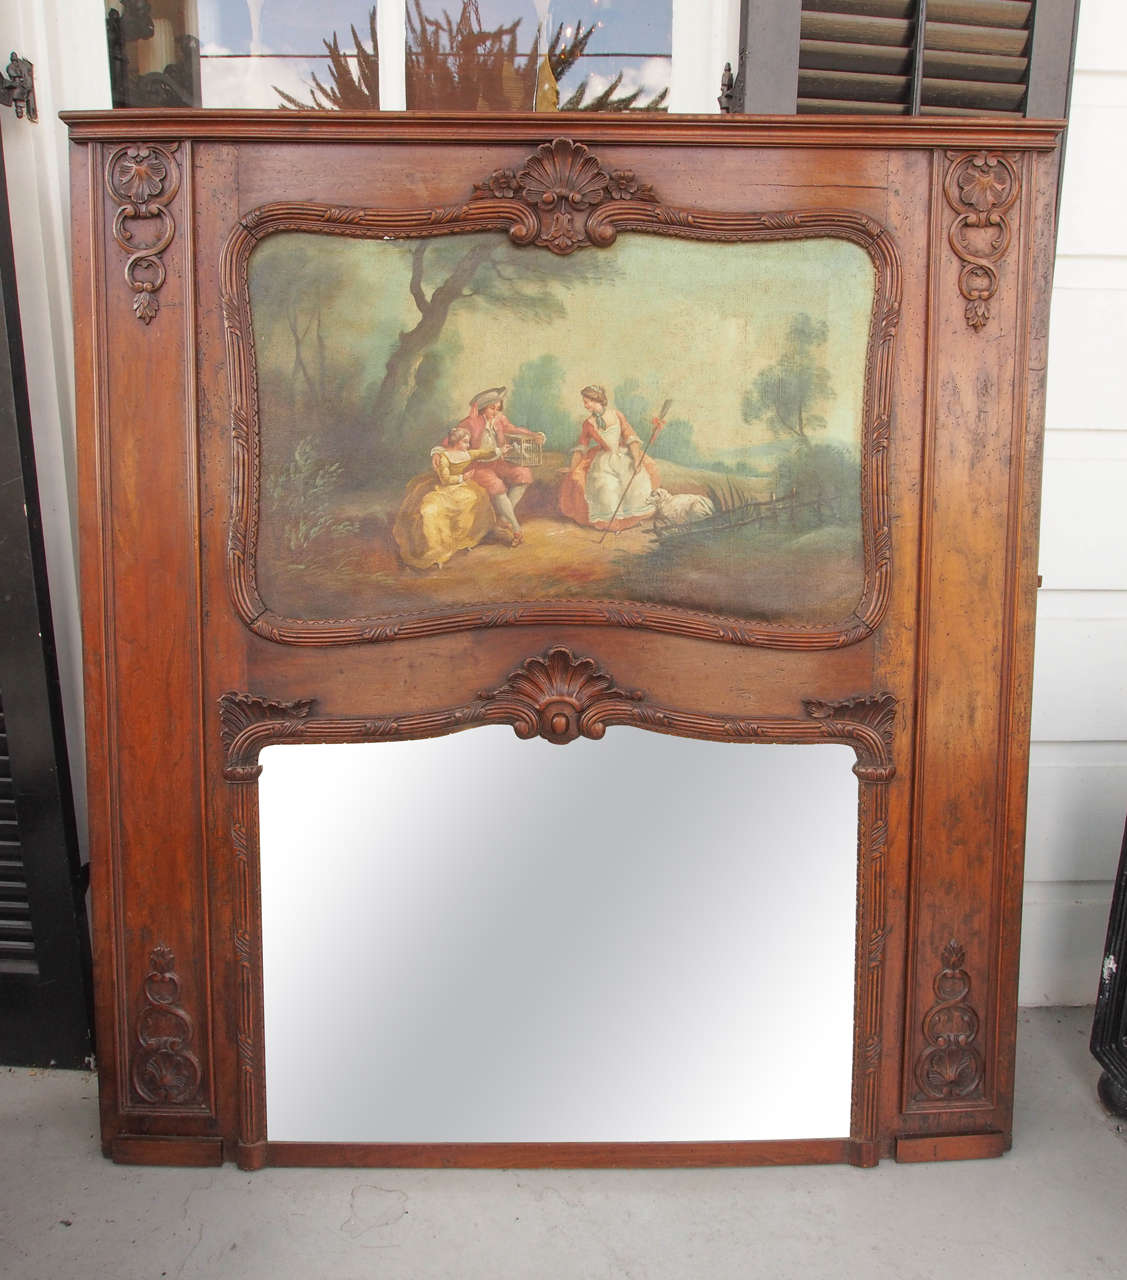 French Regence trumeau mirror of walnut with oil on canvas of French genre scene.